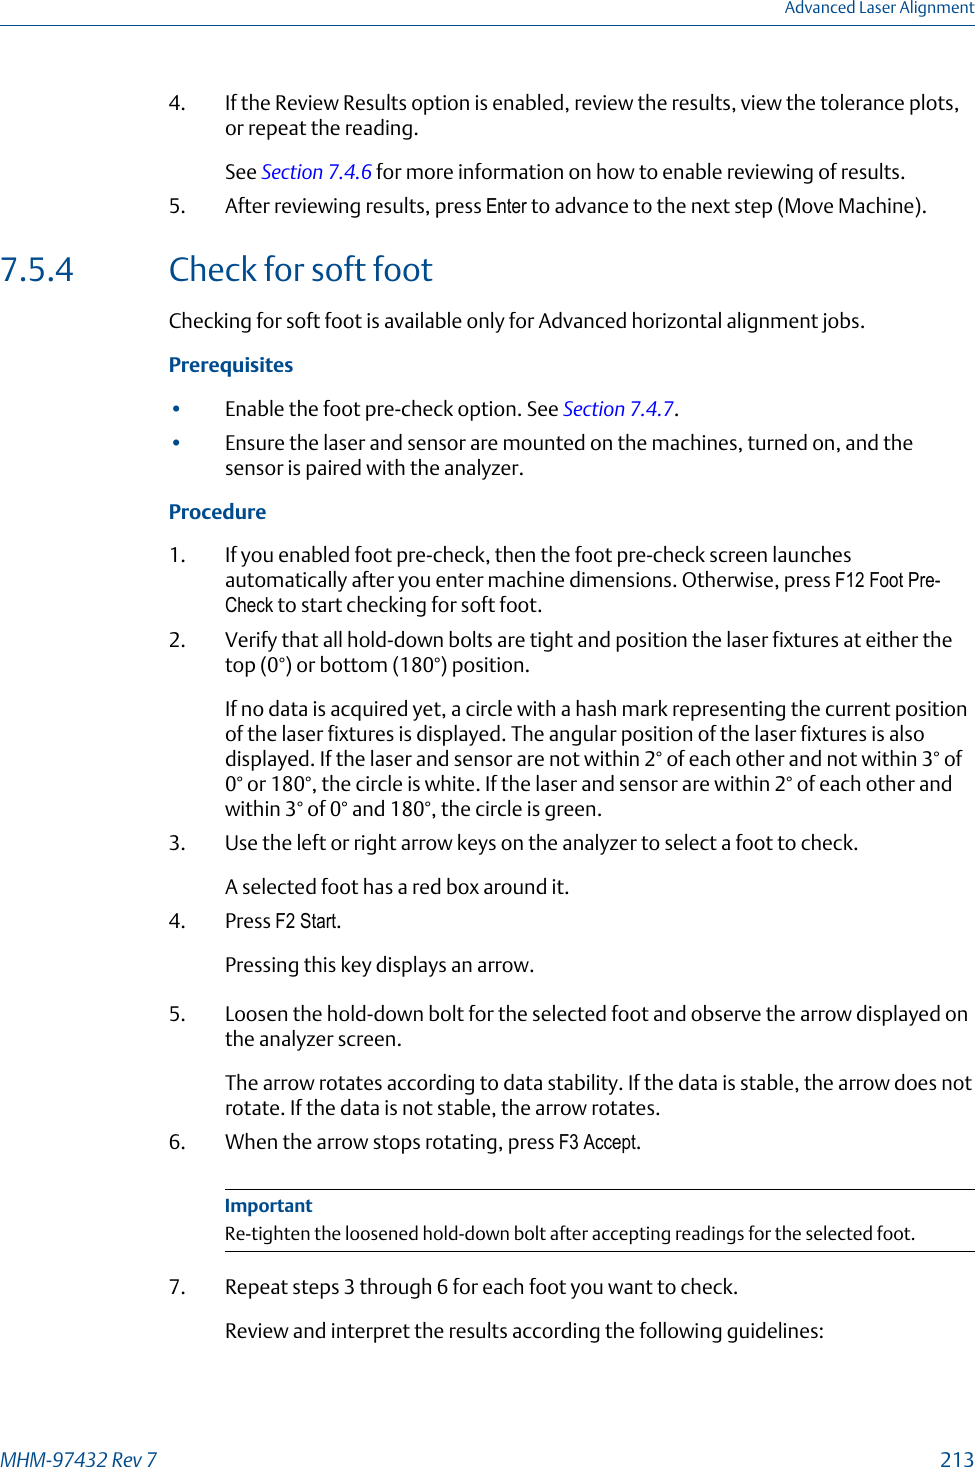 4. If the Review Results option is enabled, review the results, view the tolerance plots,or repeat the reading.See Section 7.4.6 for more information on how to enable reviewing of results.5. After reviewing results, press Enter to advance to the next step (Move Machine).7.5.4 Check for soft footChecking for soft foot is available only for Advanced horizontal alignment jobs.Prerequisites•Enable the foot pre-check option. See Section 7.4.7.•Ensure the laser and sensor are mounted on the machines, turned on, and thesensor is paired with the analyzer.Procedure1. If you enabled foot pre-check, then the foot pre-check screen launchesautomatically after you enter machine dimensions. Otherwise, press F12 Foot Pre-Check to start checking for soft foot.2. Verify that all hold-down bolts are tight and position the laser fixtures at either thetop (0°) or bottom (180°) position.If no data is acquired yet, a circle with a hash mark representing the current positionof the laser fixtures is displayed. The angular position of the laser fixtures is alsodisplayed. If the laser and sensor are not within 2° of each other and not within 3° of0° or 180°, the circle is white. If the laser and sensor are within 2° of each other andwithin 3° of 0° and 180°, the circle is green.3. Use the left or right arrow keys on the analyzer to select a foot to check.A selected foot has a red box around it.4. Press F2 Start.Pressing this key displays an arrow.5. Loosen the hold-down bolt for the selected foot and observe the arrow displayed onthe analyzer screen.The arrow rotates according to data stability. If the data is stable, the arrow does notrotate. If the data is not stable, the arrow rotates.6. When the arrow stops rotating, press F3 Accept.ImportantRe-tighten the loosened hold-down bolt after accepting readings for the selected foot.7. Repeat steps 3 through 6 for each foot you want to check.Review and interpret the results according the following guidelines:Advanced Laser AlignmentMHM-97432 Rev 7  213